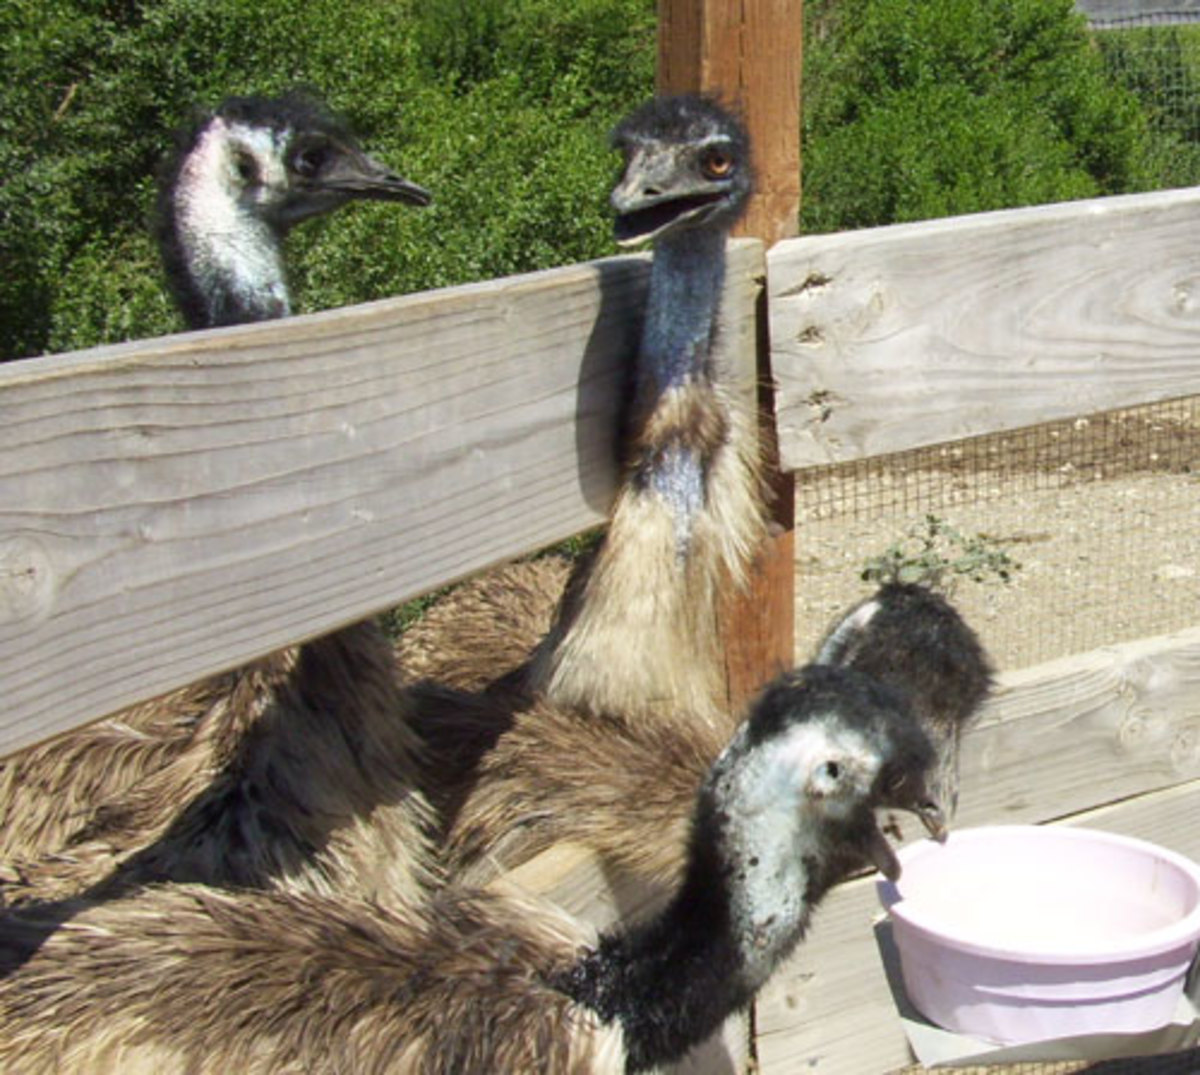 The emu is part of a family of flightless birds called ratites